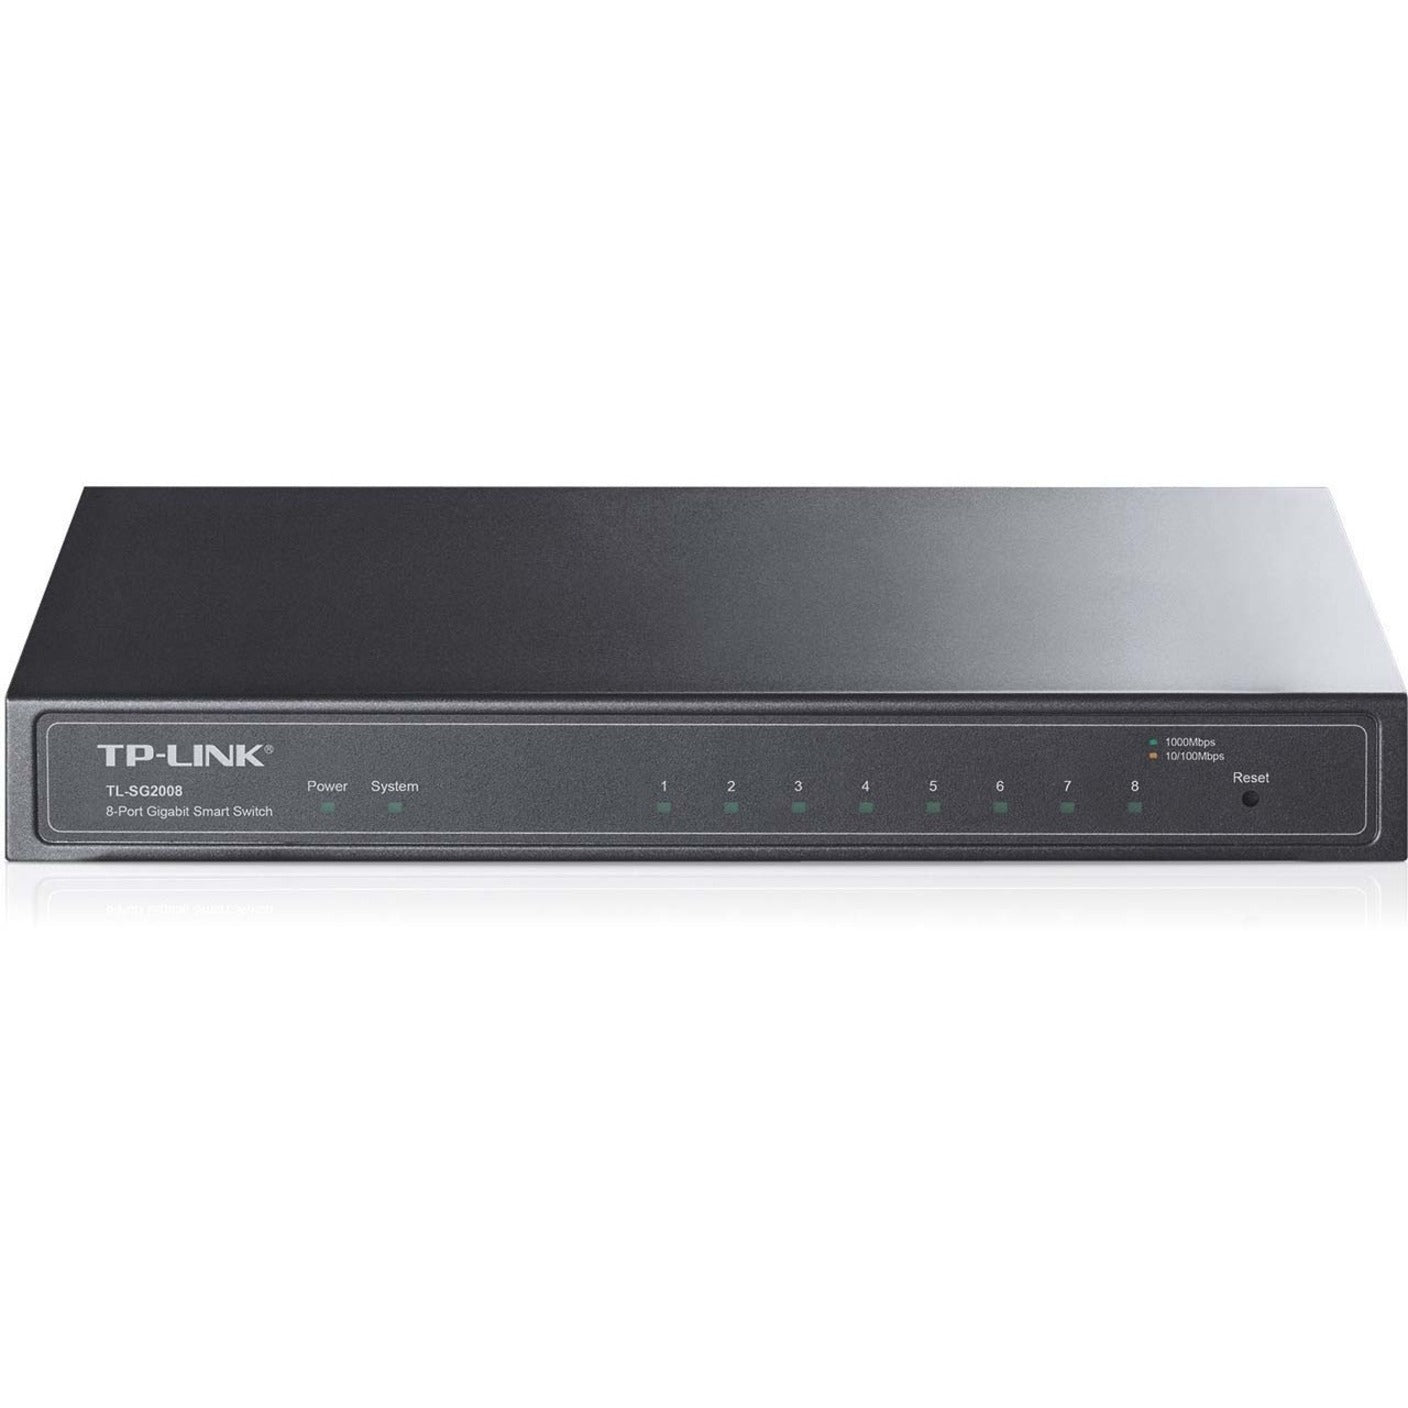 TP-Link TL-SG2008 8-Port Gigabit Smart Switch, Easy-to-Use Network Switch for Fast and Reliable Connections